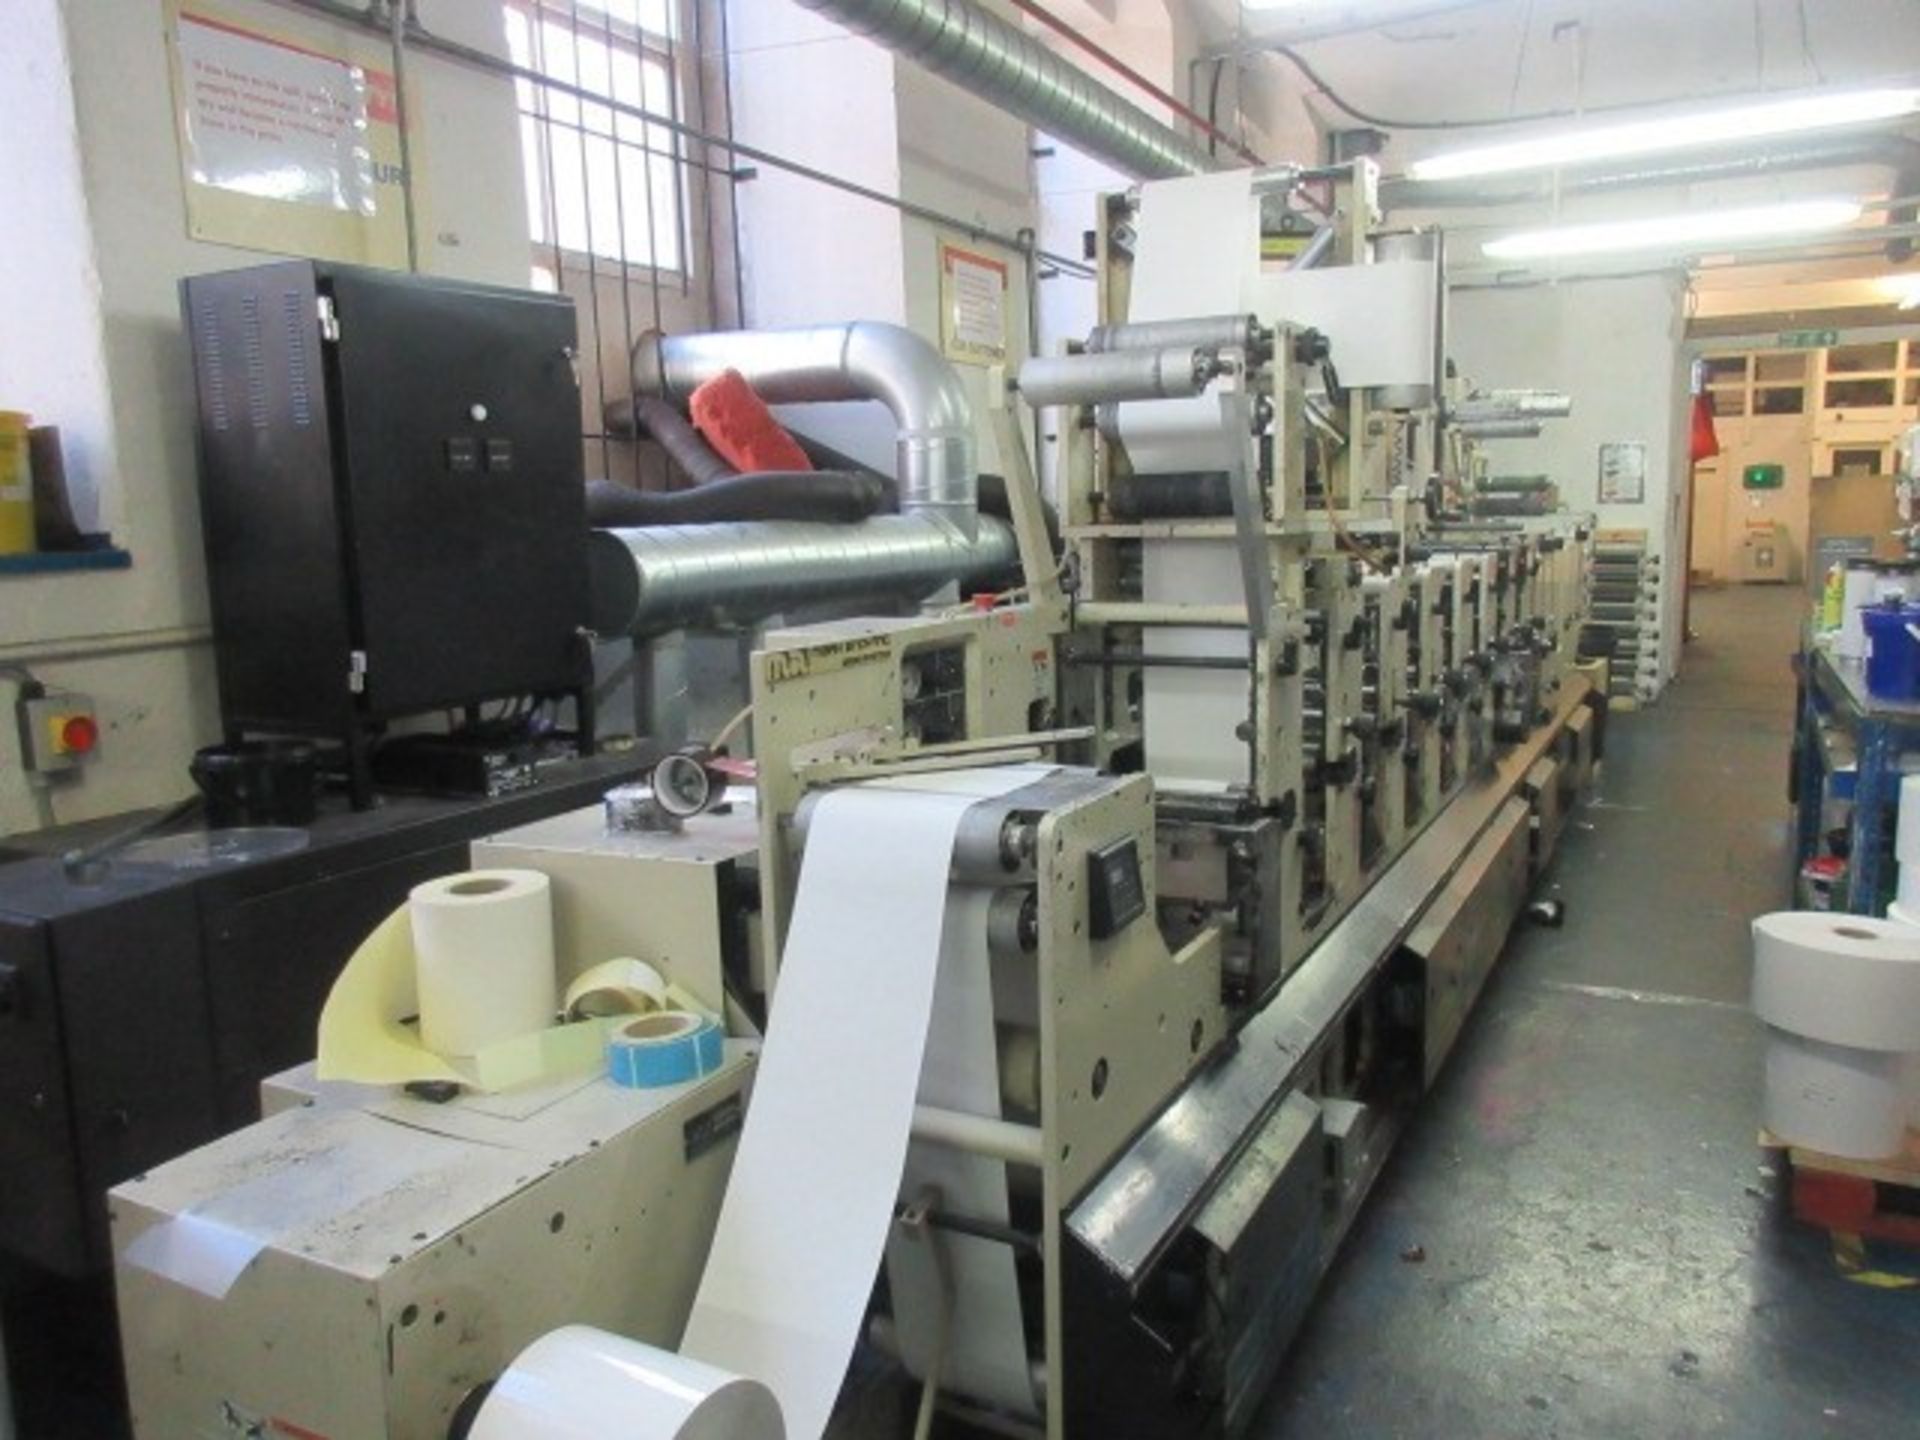 Mark Andy 2200-10F 10” 8 colour flexographic label printing press. Serial no: 1260086 (2002) - Image 140 of 383